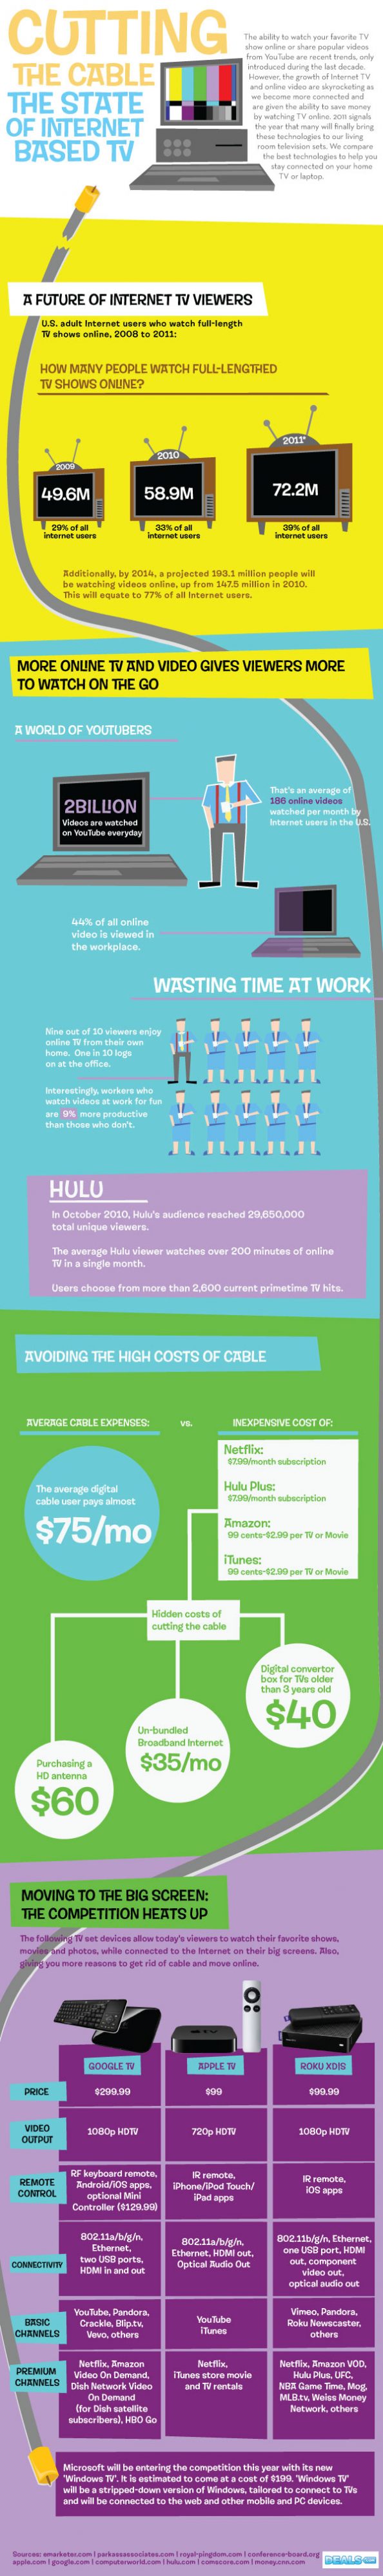 Cutting the Cable – The State of Internet Based TV (Infographic)